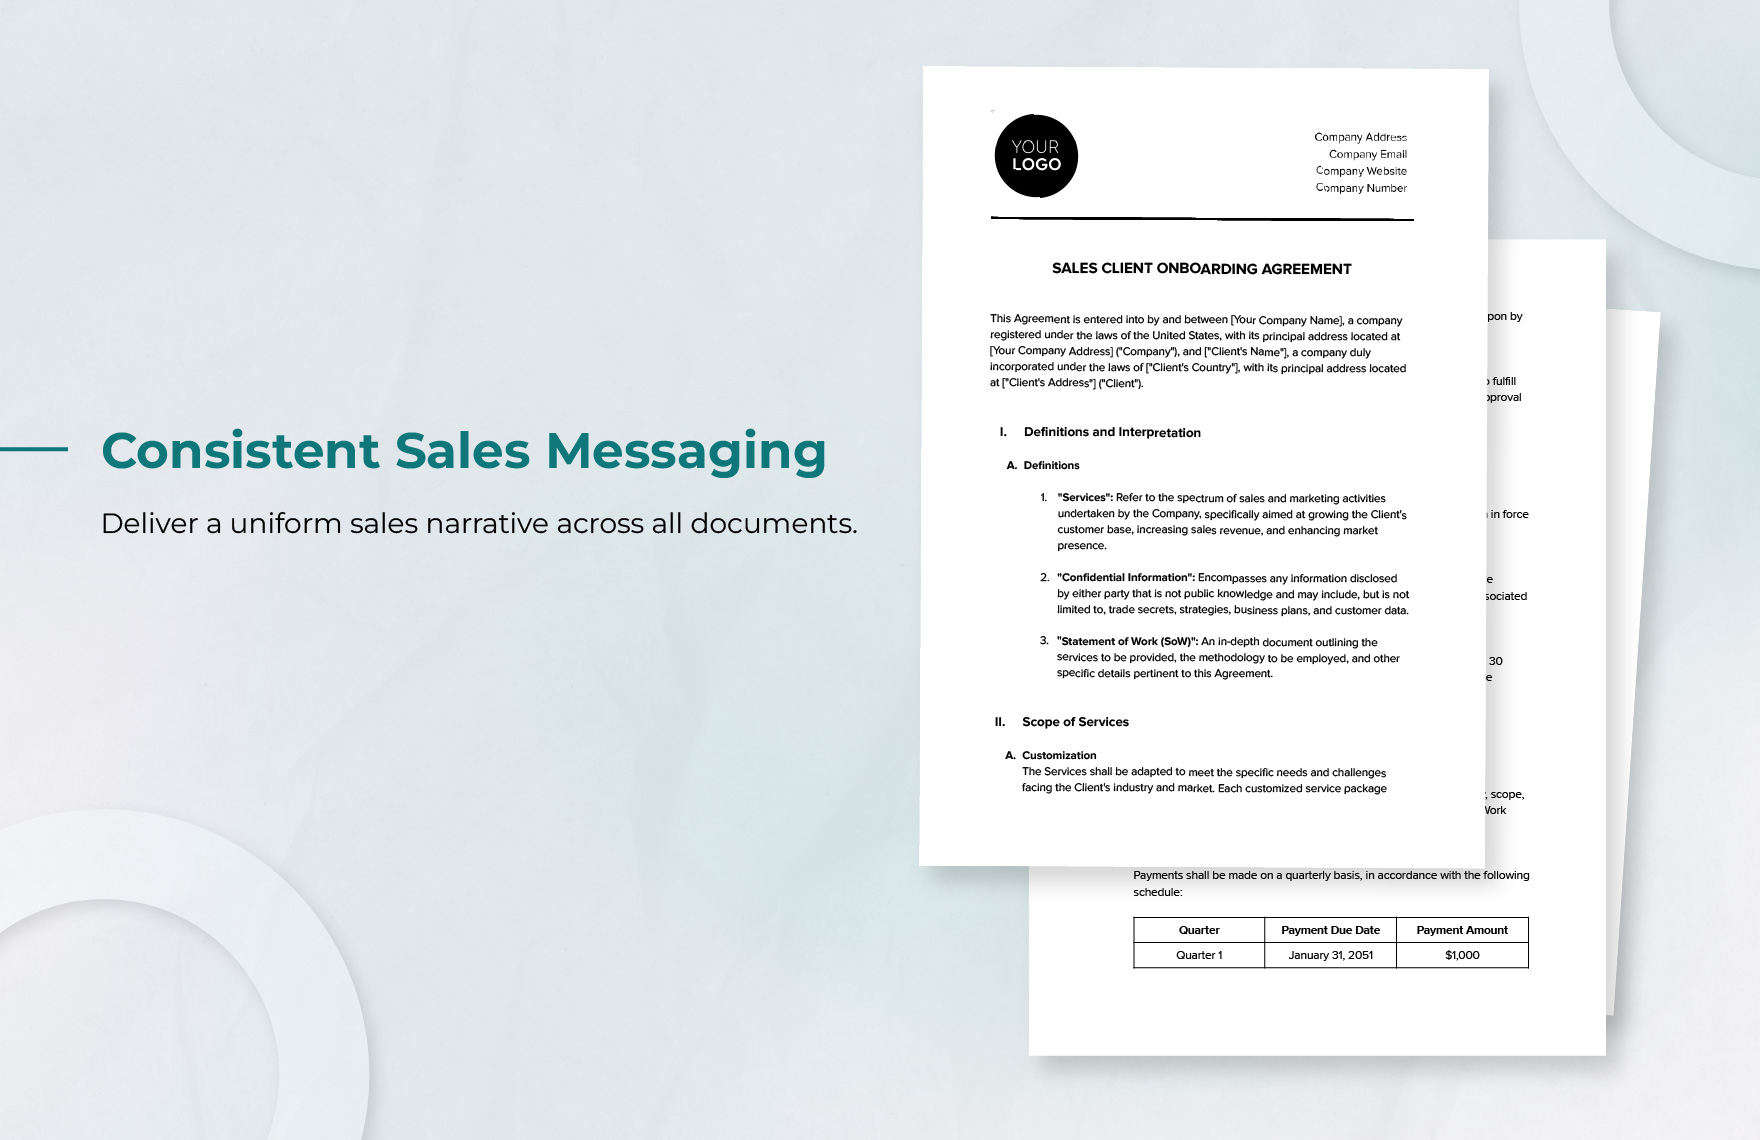 Sales Client Onboarding Agreement Template